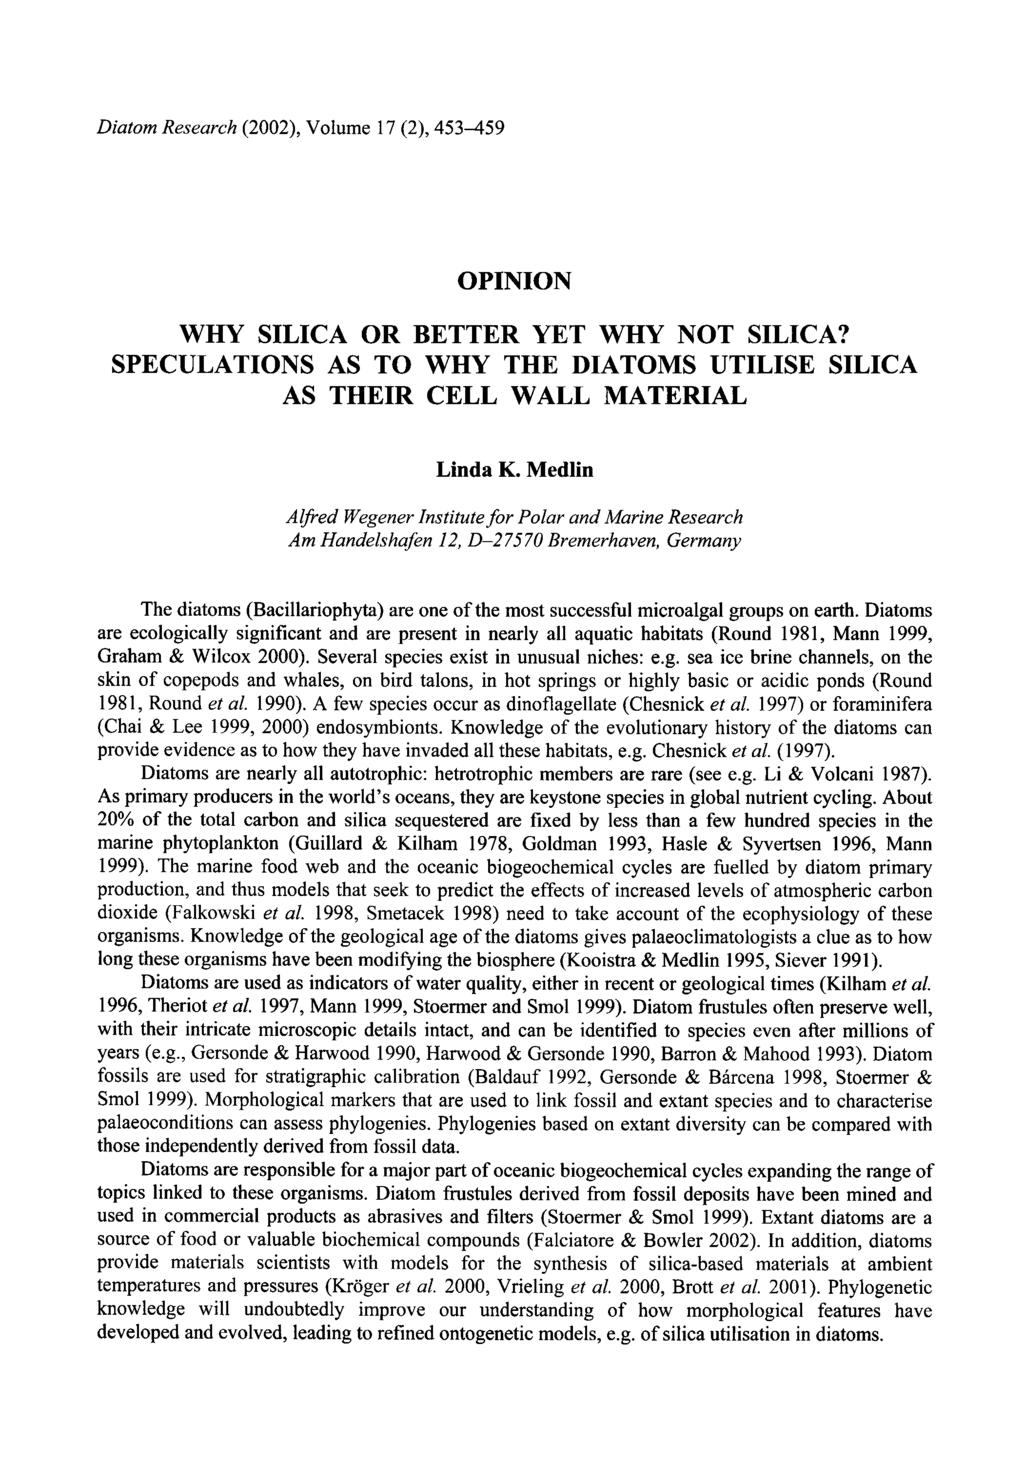 Diatom Research (2002), Volume 17 (2), 453459 OPINION WHY SILICA OR BETTER YET WHY NOT SILICA? SPECULATIONS AS TO WHY THE DIATOMS UTILISE SILICA AS THEIR CELL WALL MATERIAL Linda K.